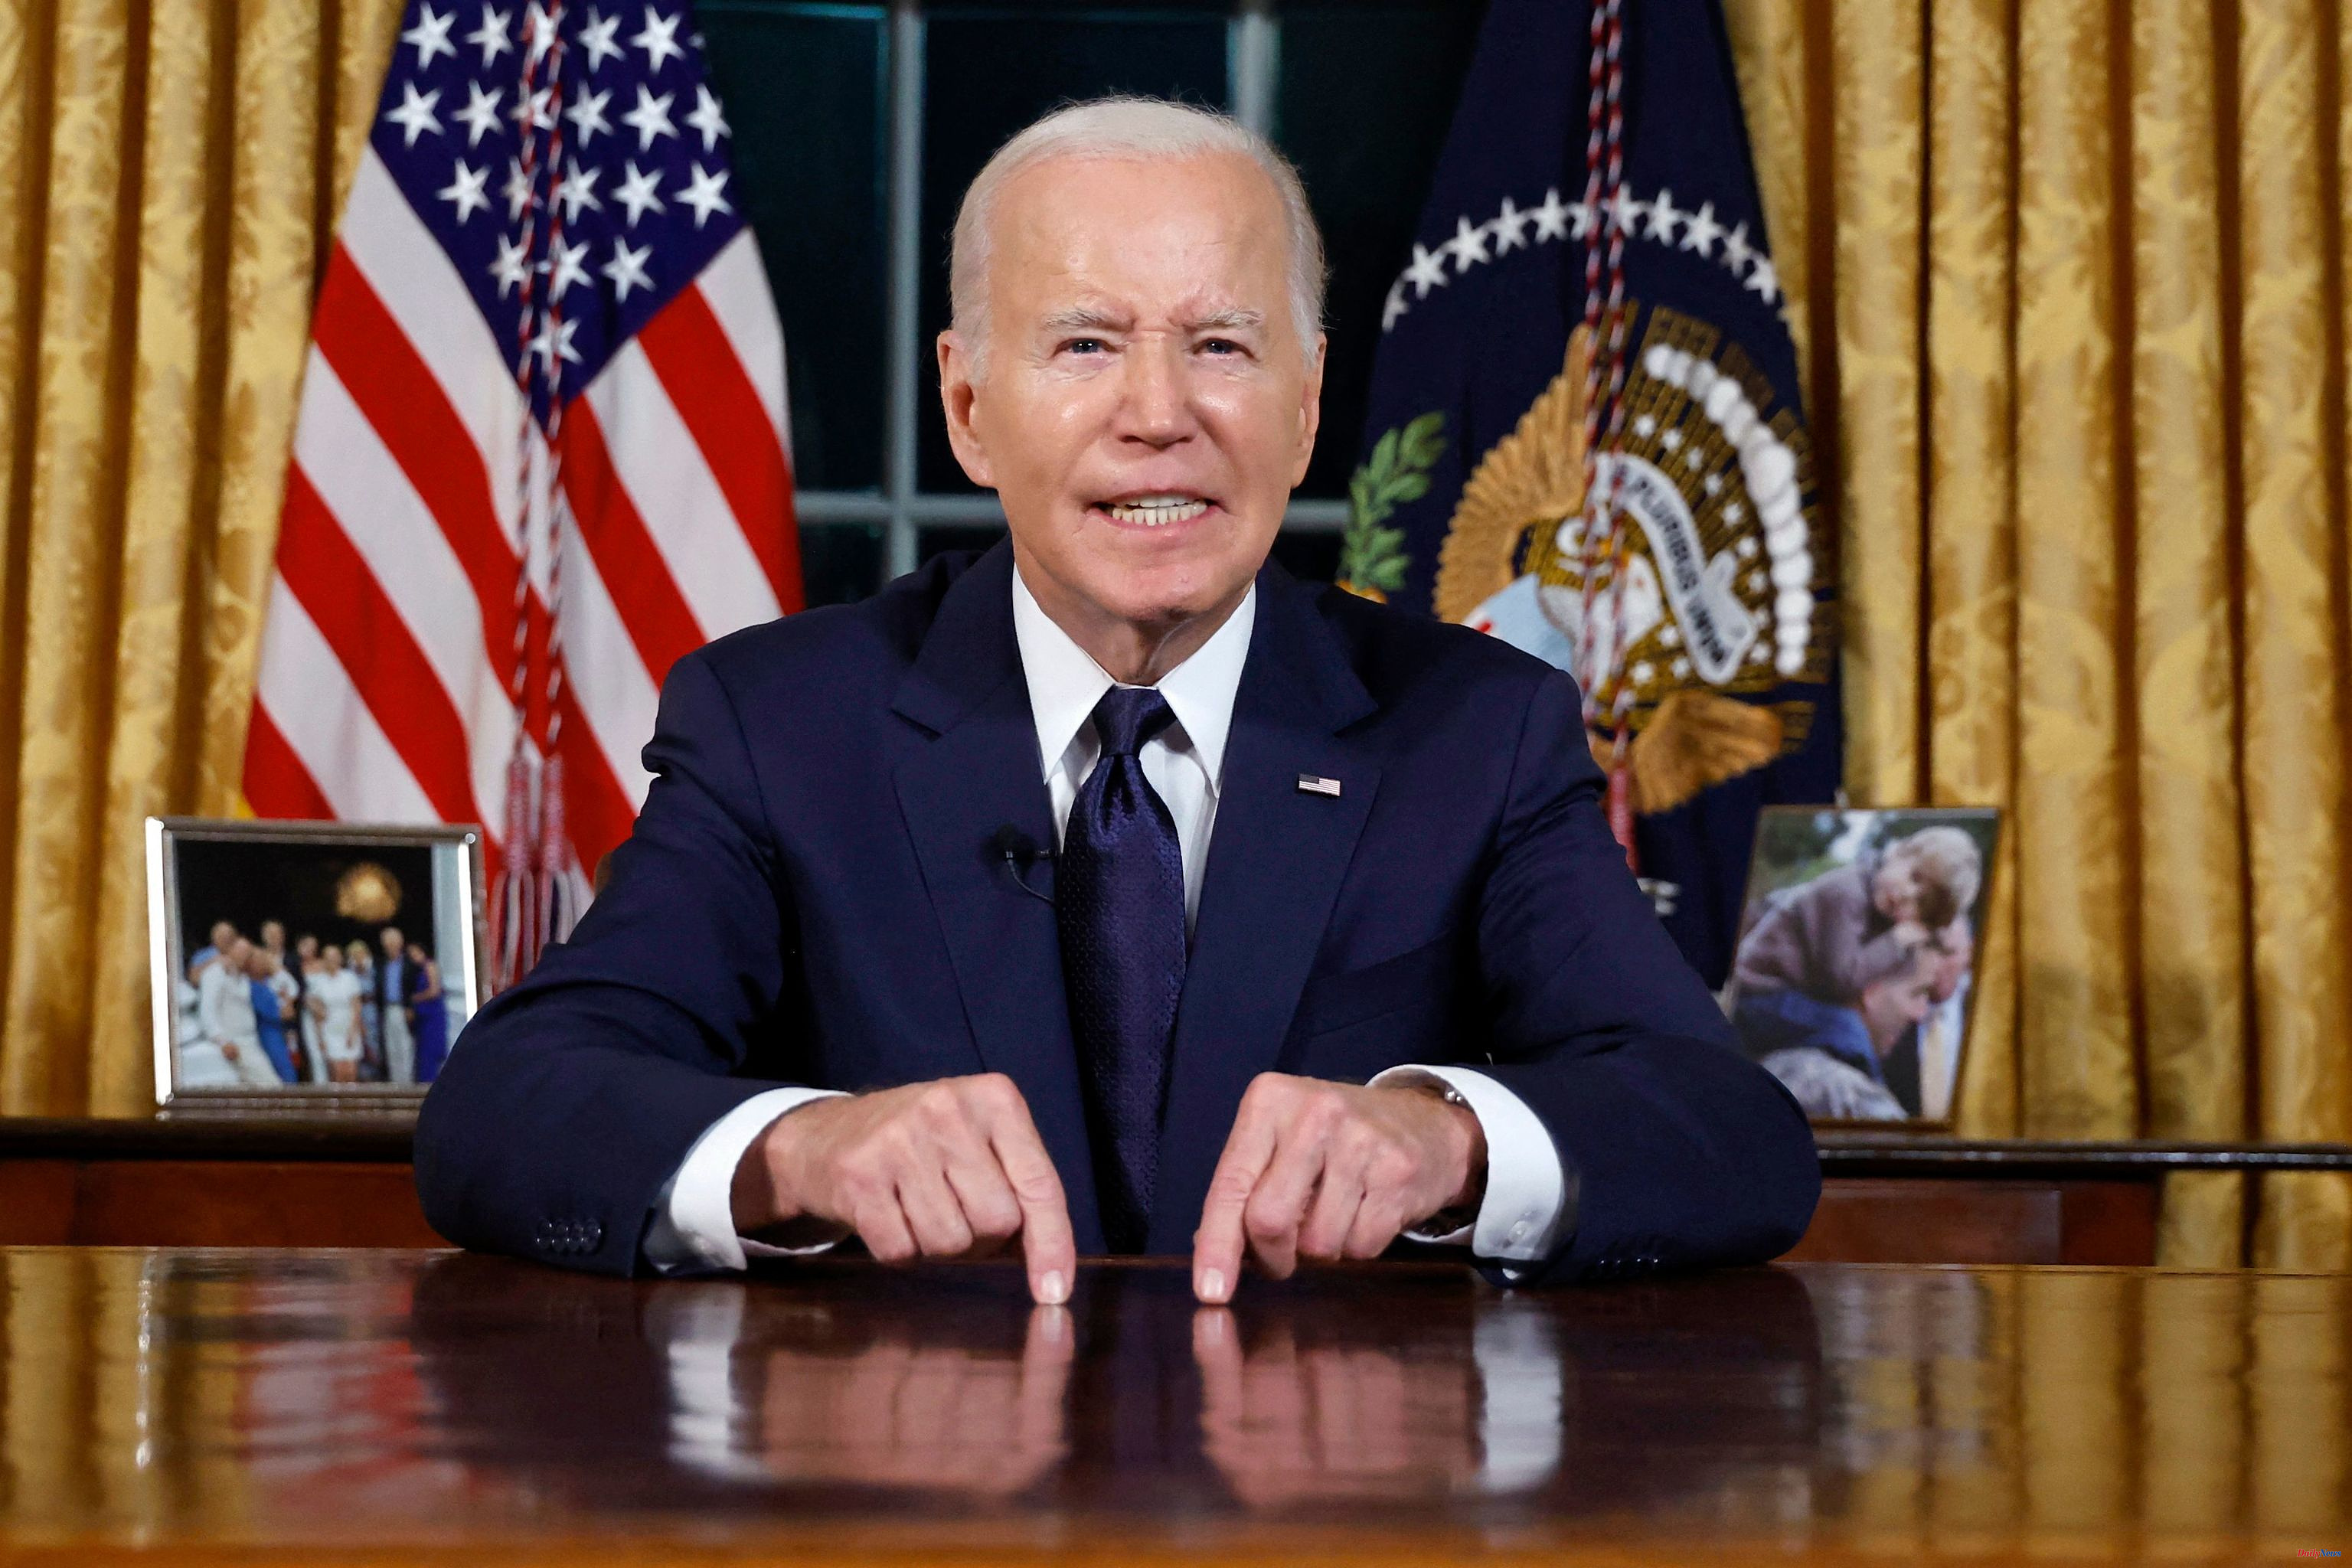 Washington Biden asks Congress for 100 billion euros for Ukraine, Israel and China's neighbors in the Pacific